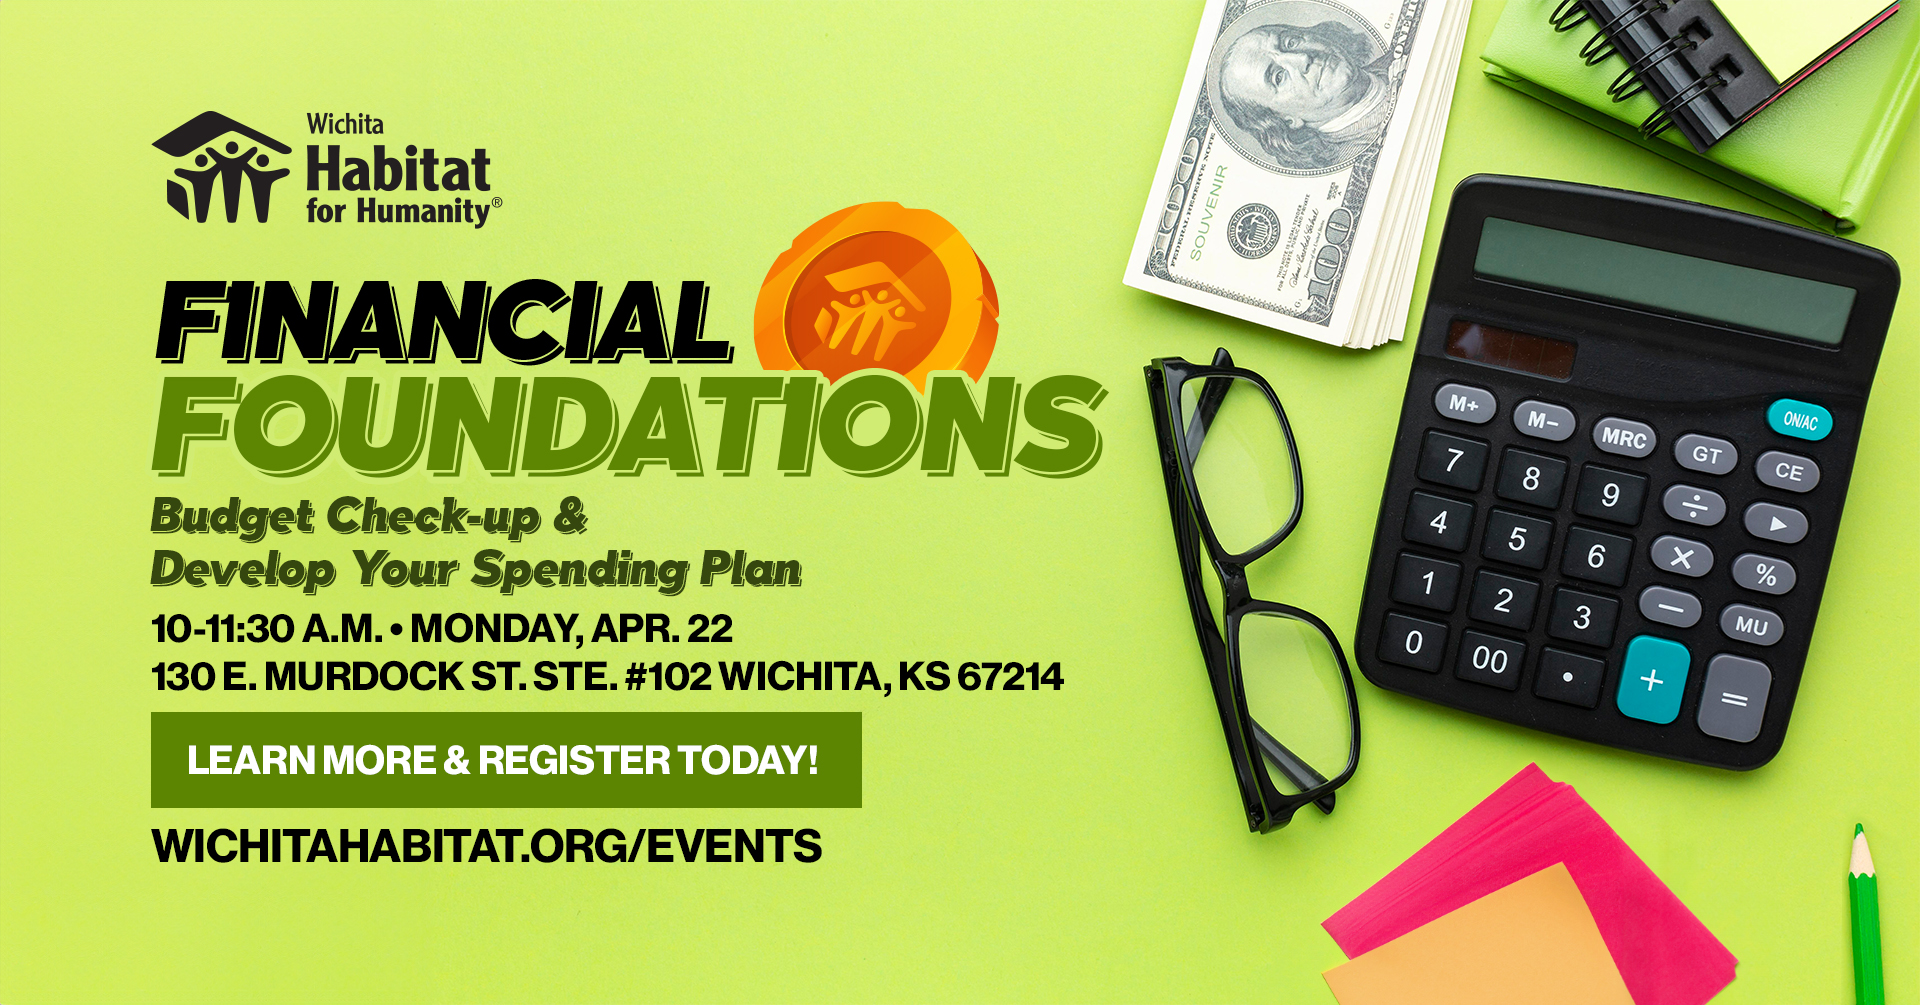 Financial Foundations: Budget Check-up & Develop Your Spending Plan event banner, 10-11:30 a.m., Monday, Apr. 22, 130 E. Murdock St. Ste. #102 Wichita, KS 67214, Learn more and register today! wichitahabitat.org/events